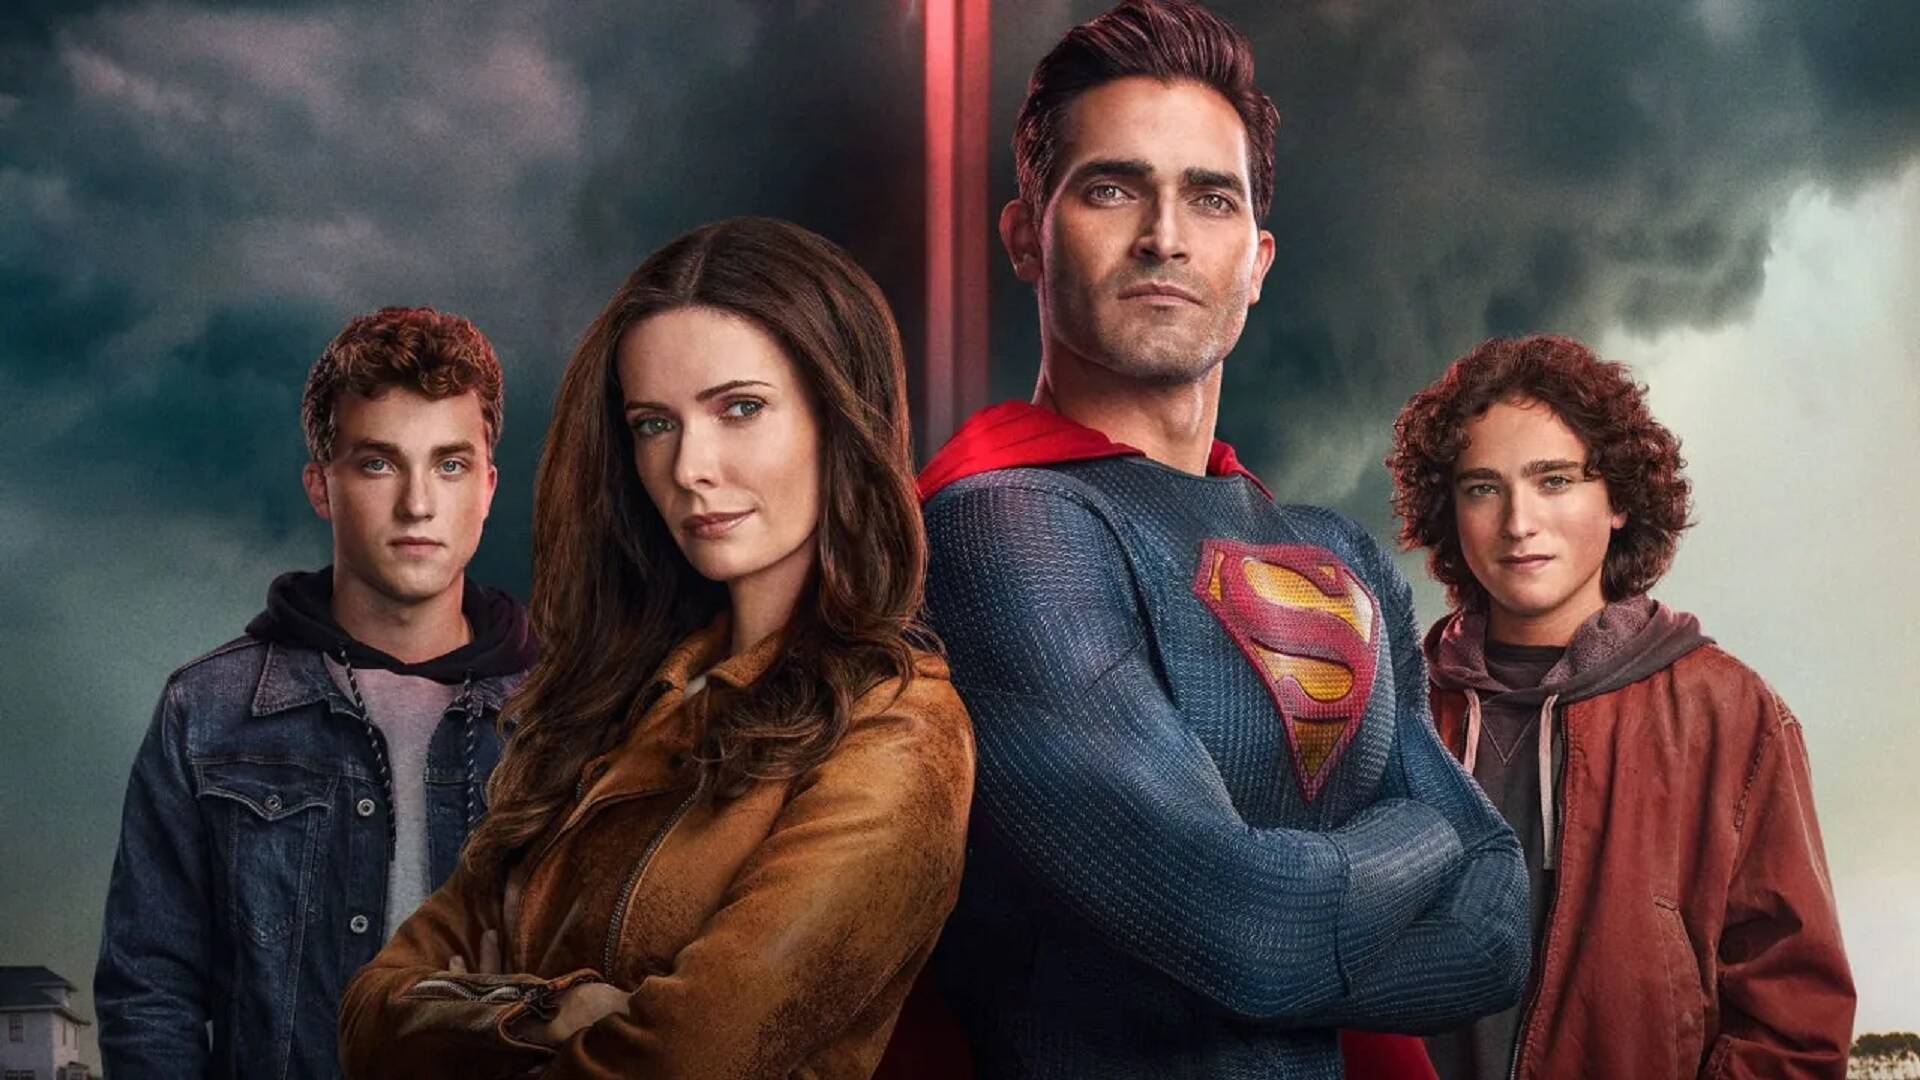 Promo image of the Kent family for "Superman and Lois" (Source: The CW)